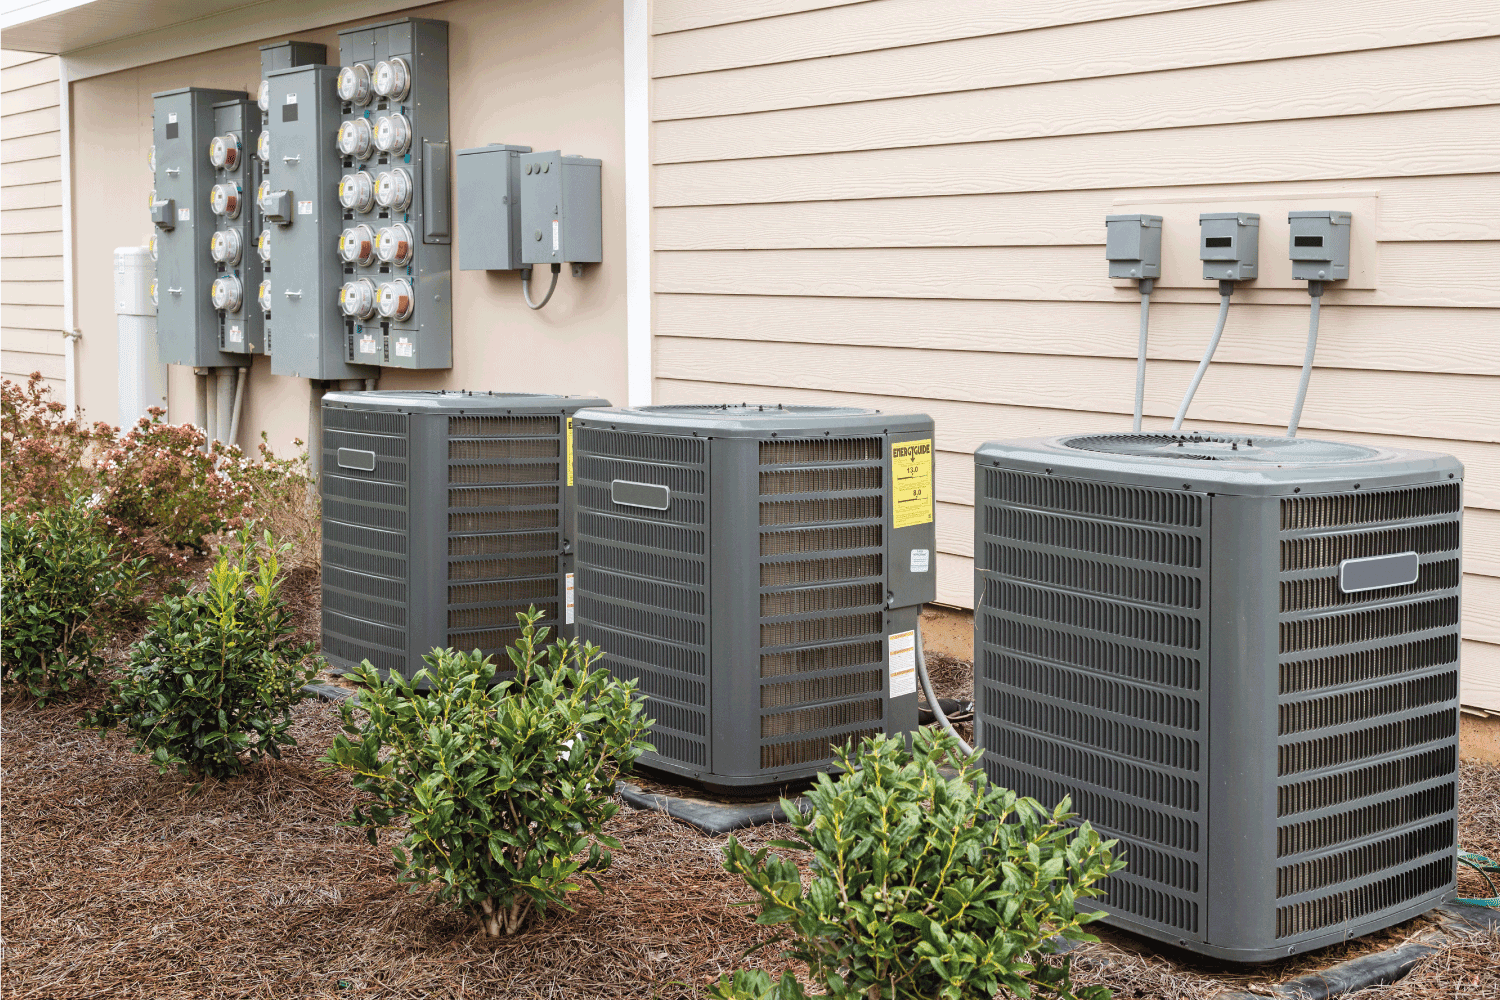 Three air conditioning units with a panel of electricity meters behind, all at the side of a recently-constructed apartment building.